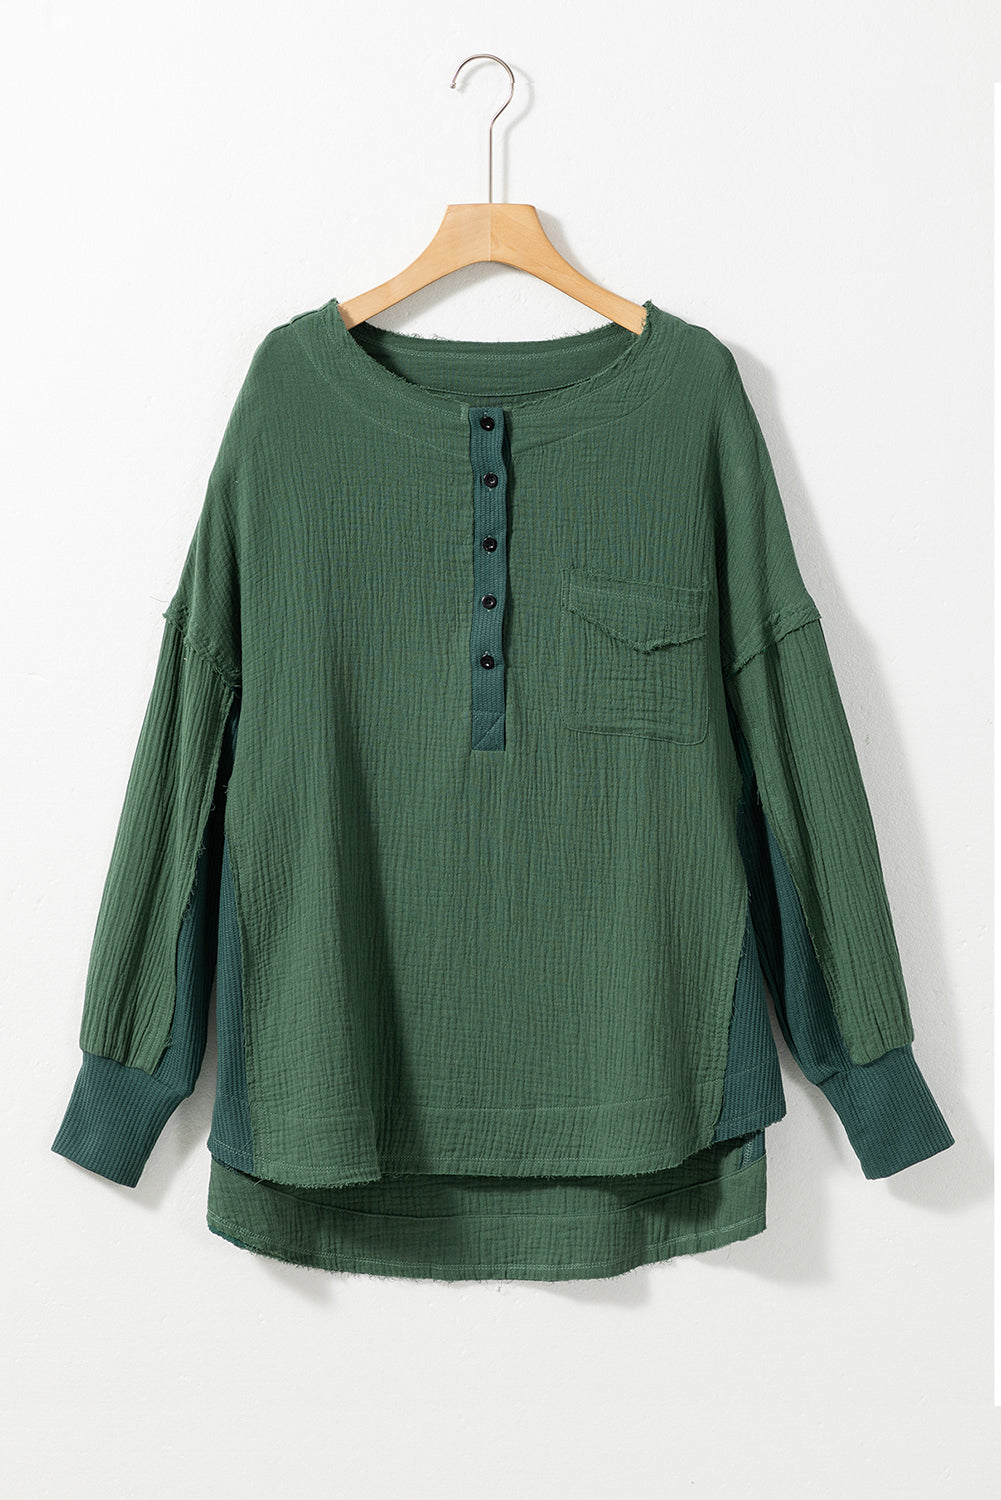 Green Textured Waffle Knit Patchwork Buttoned Neck Loose Blouse